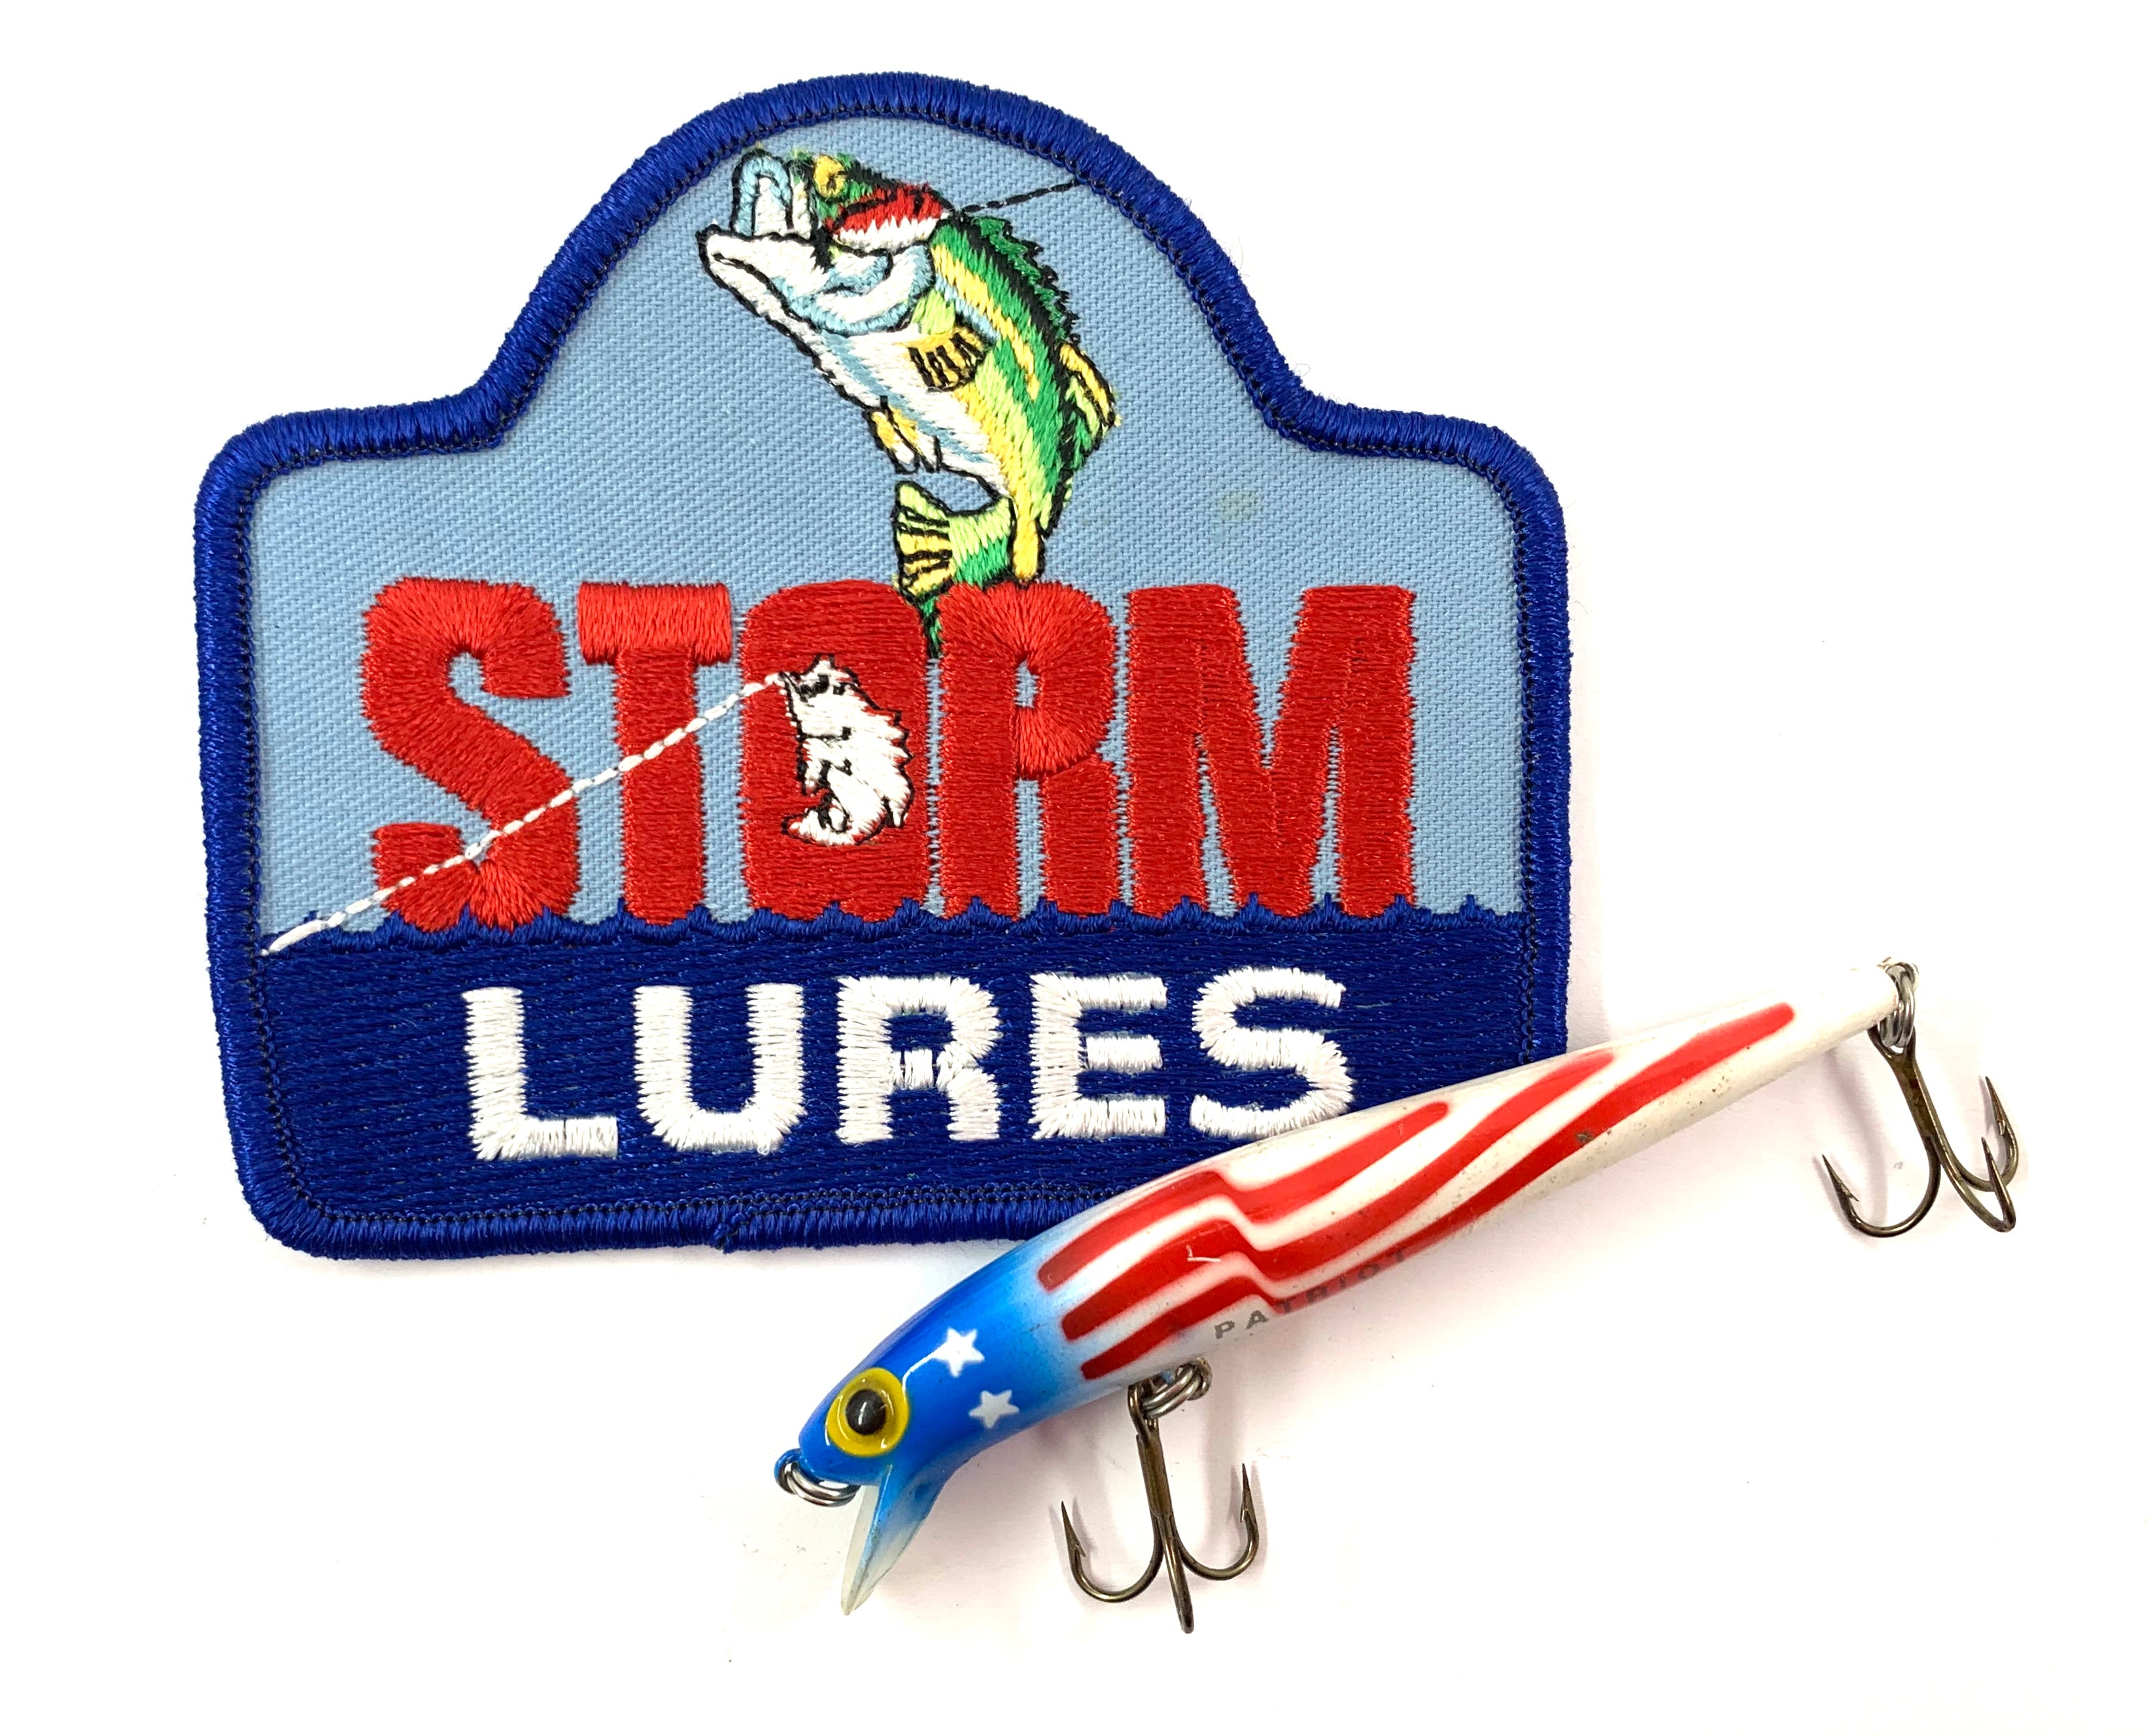 Storm Pike Vintage Fishing Equipment for sale